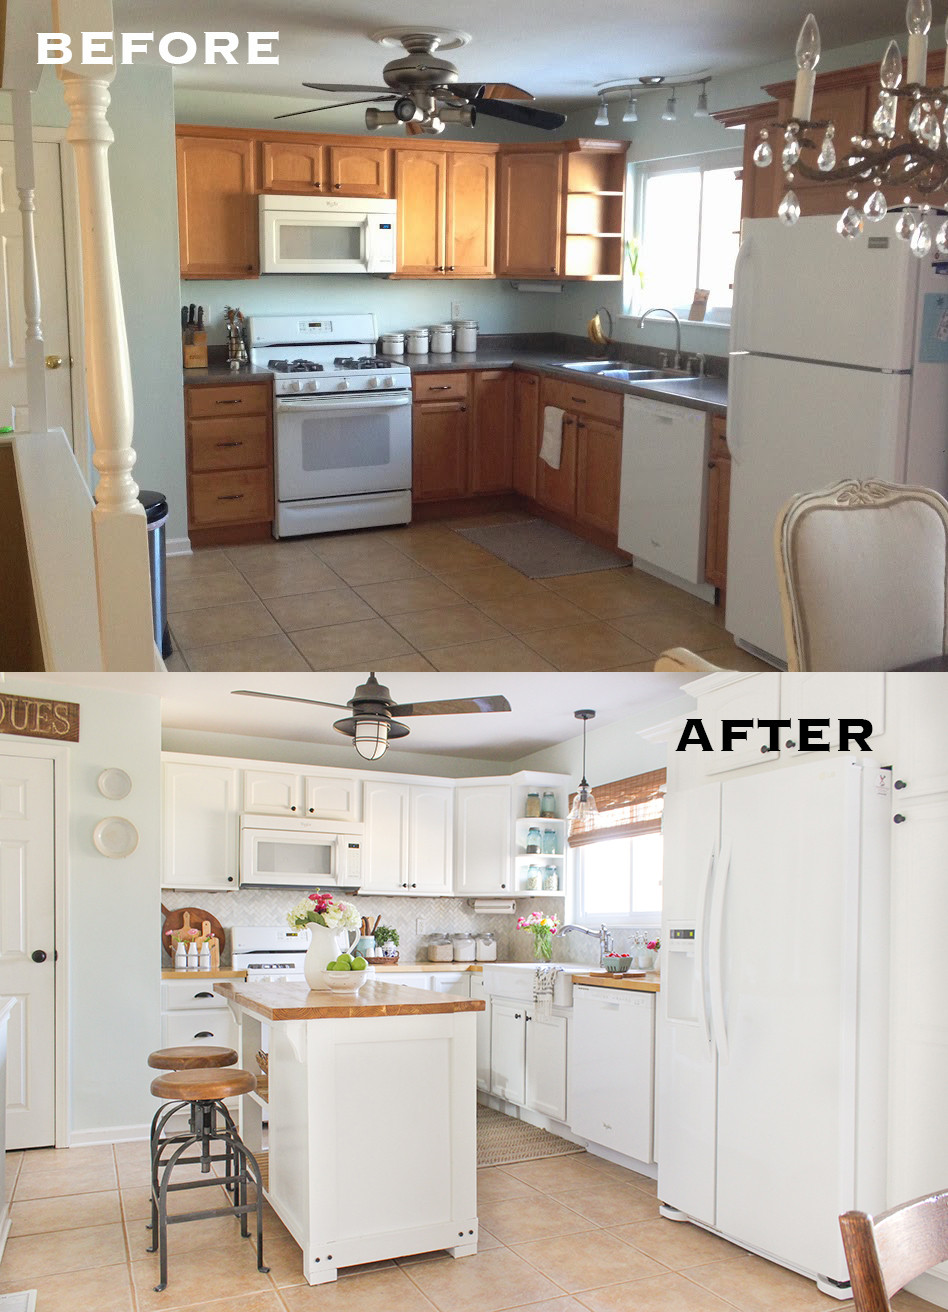 Remodeling Kitchen Before And After
 The Kitchen Reveal Shades of Blue Interiors